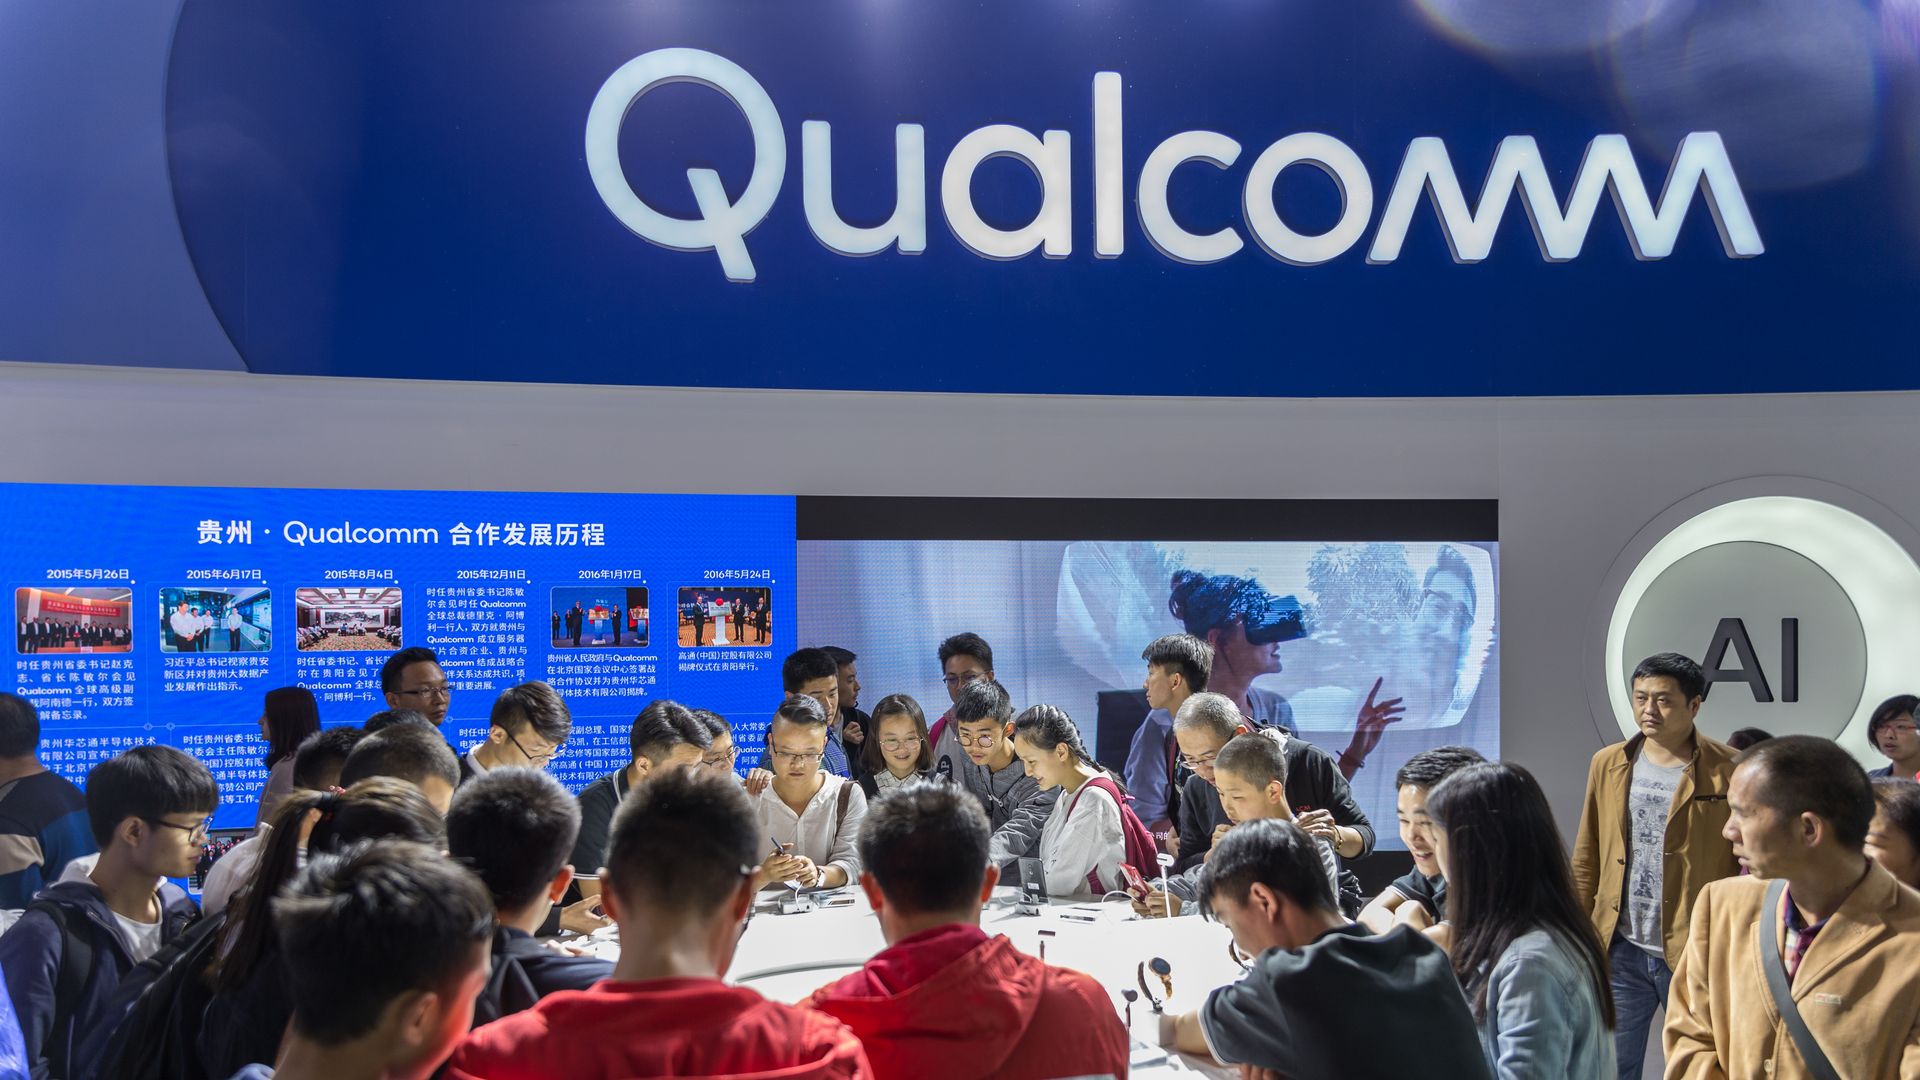 A Qualcomm booth at a Chinese trade show